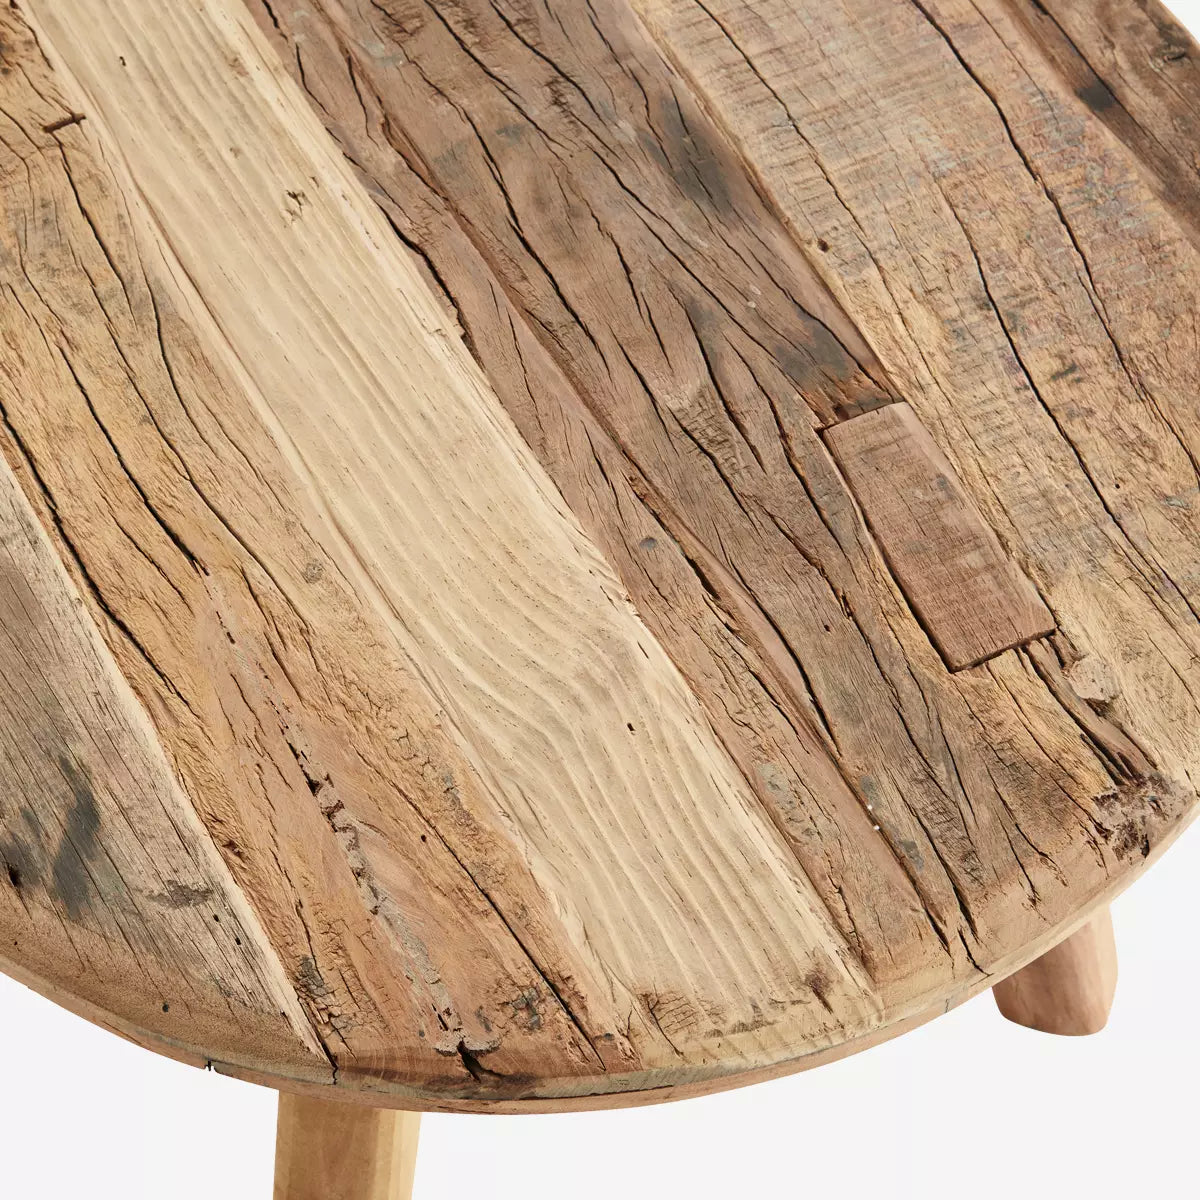 WOODEN COFFEE TABLE - NATURAL, MADAM STOLTZ